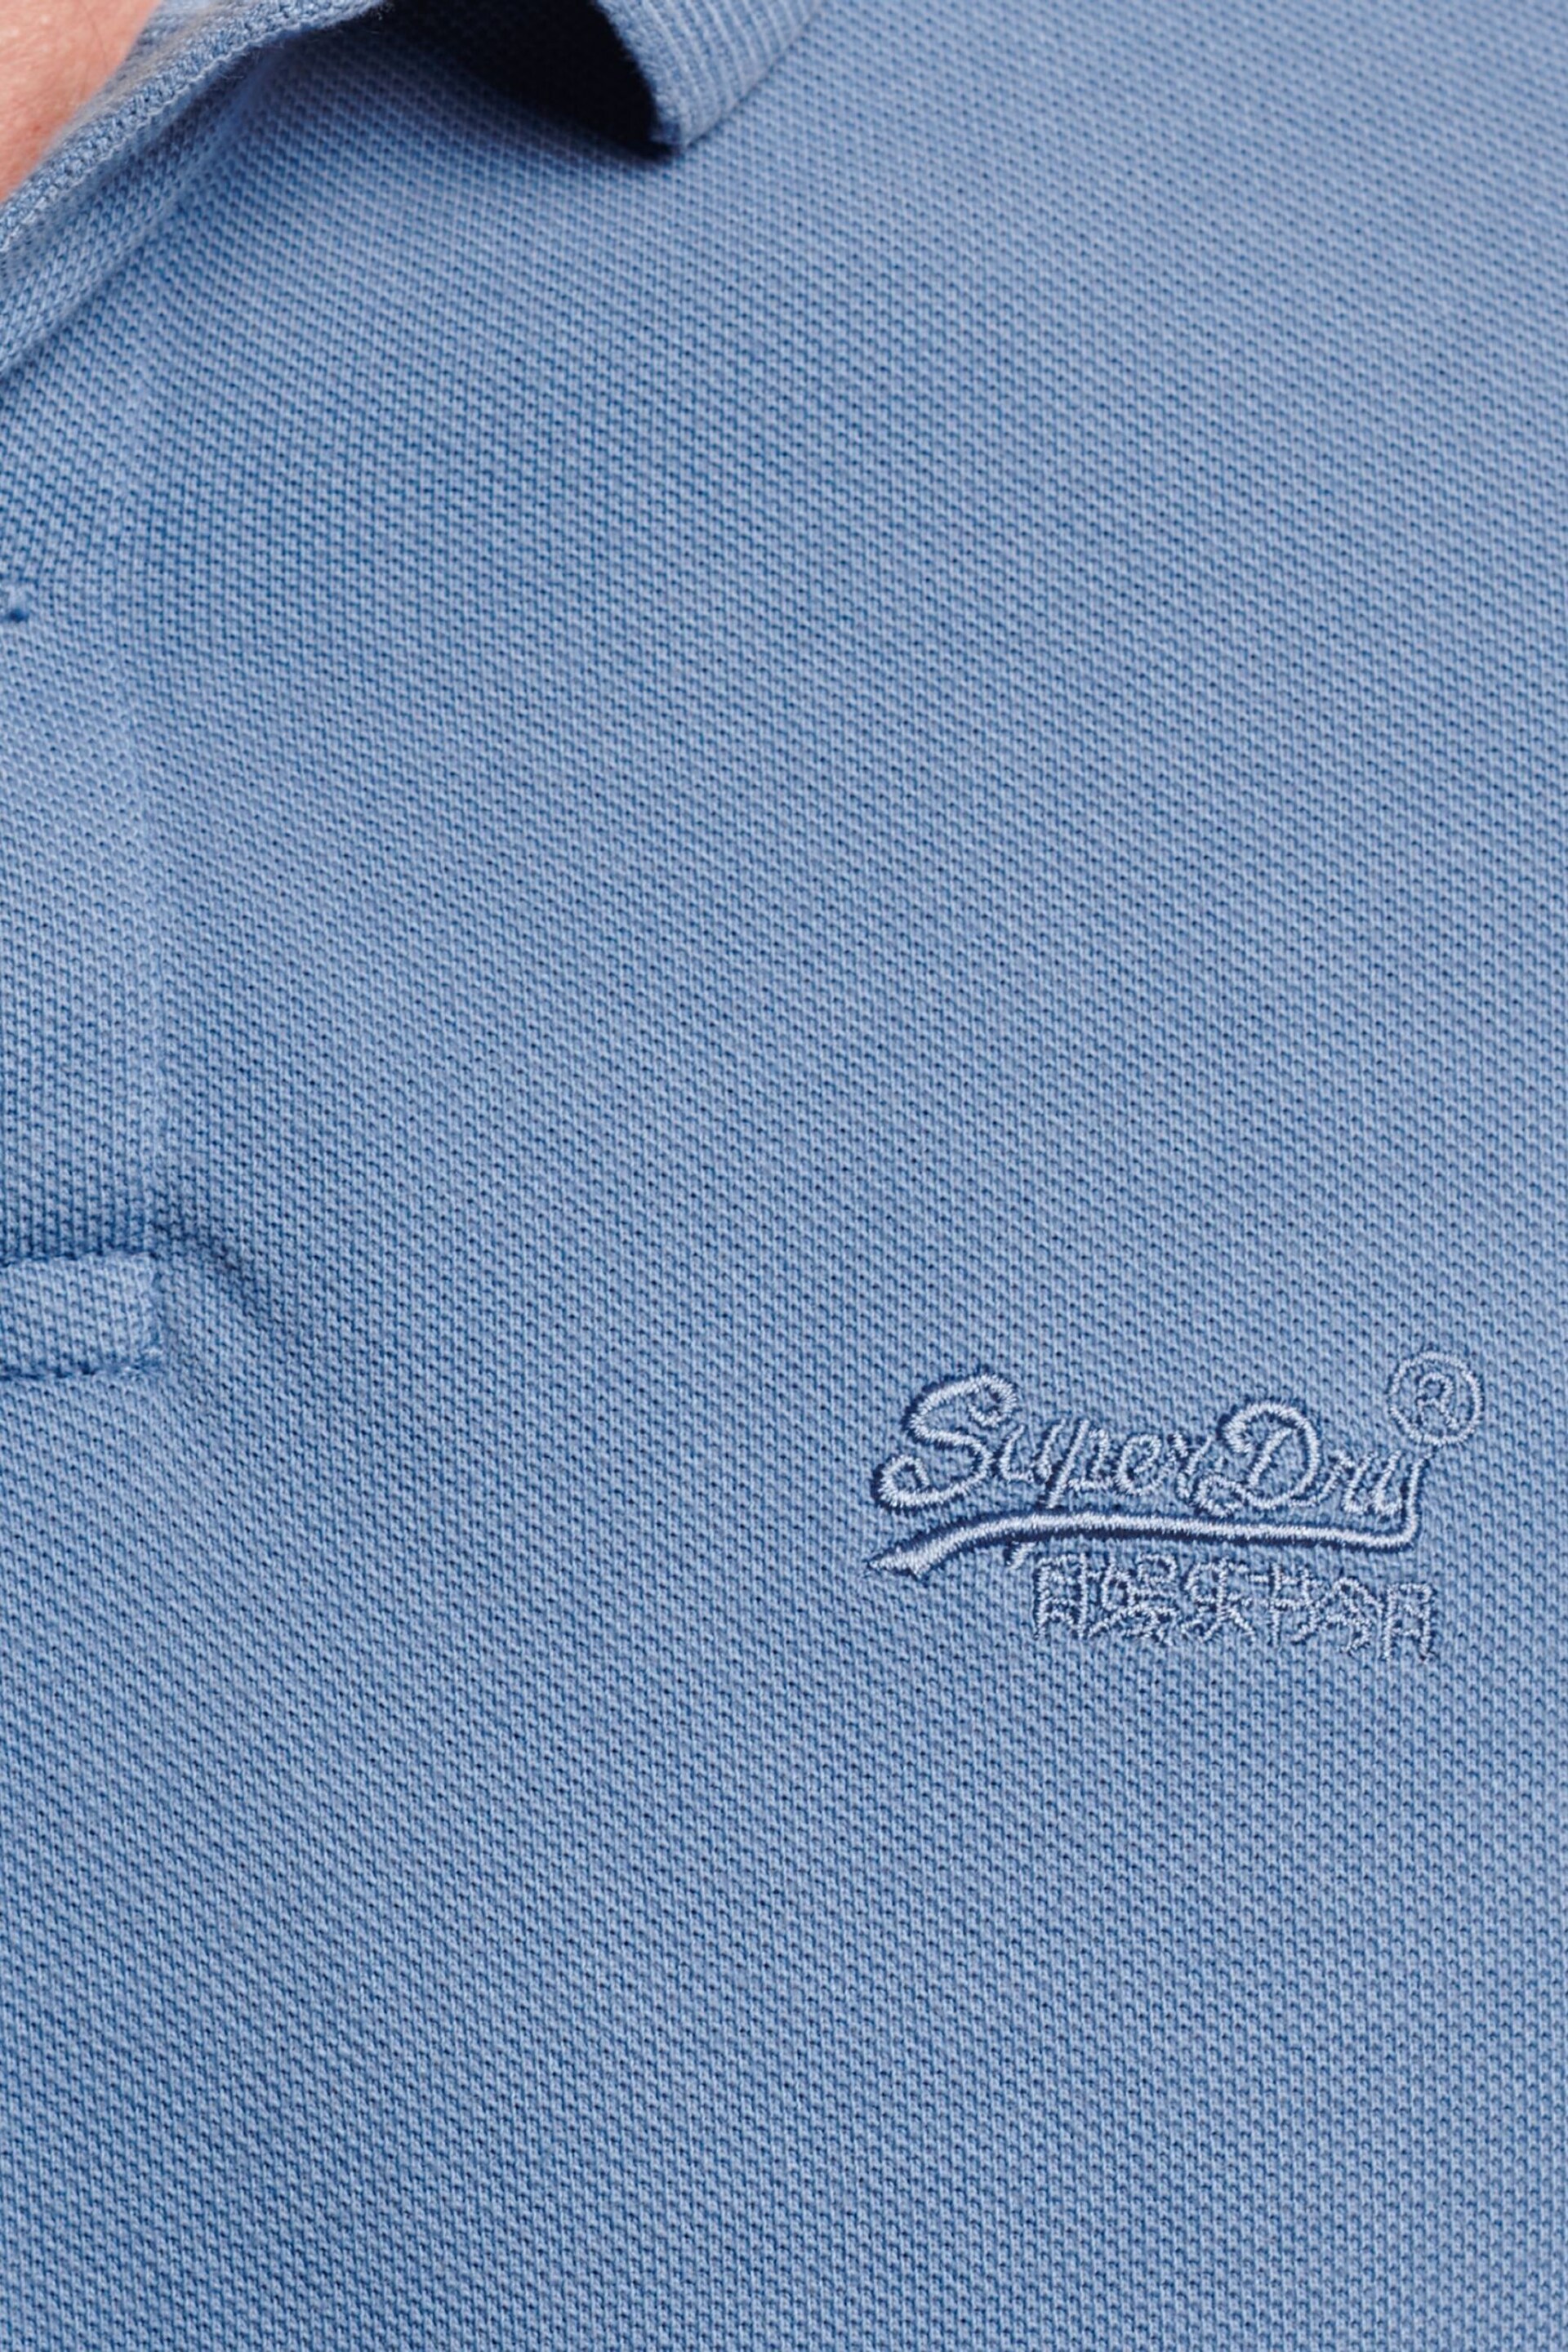 Superdry Blue Superdry Grey Retro Repeat T-Shirt - Image 4 of 7